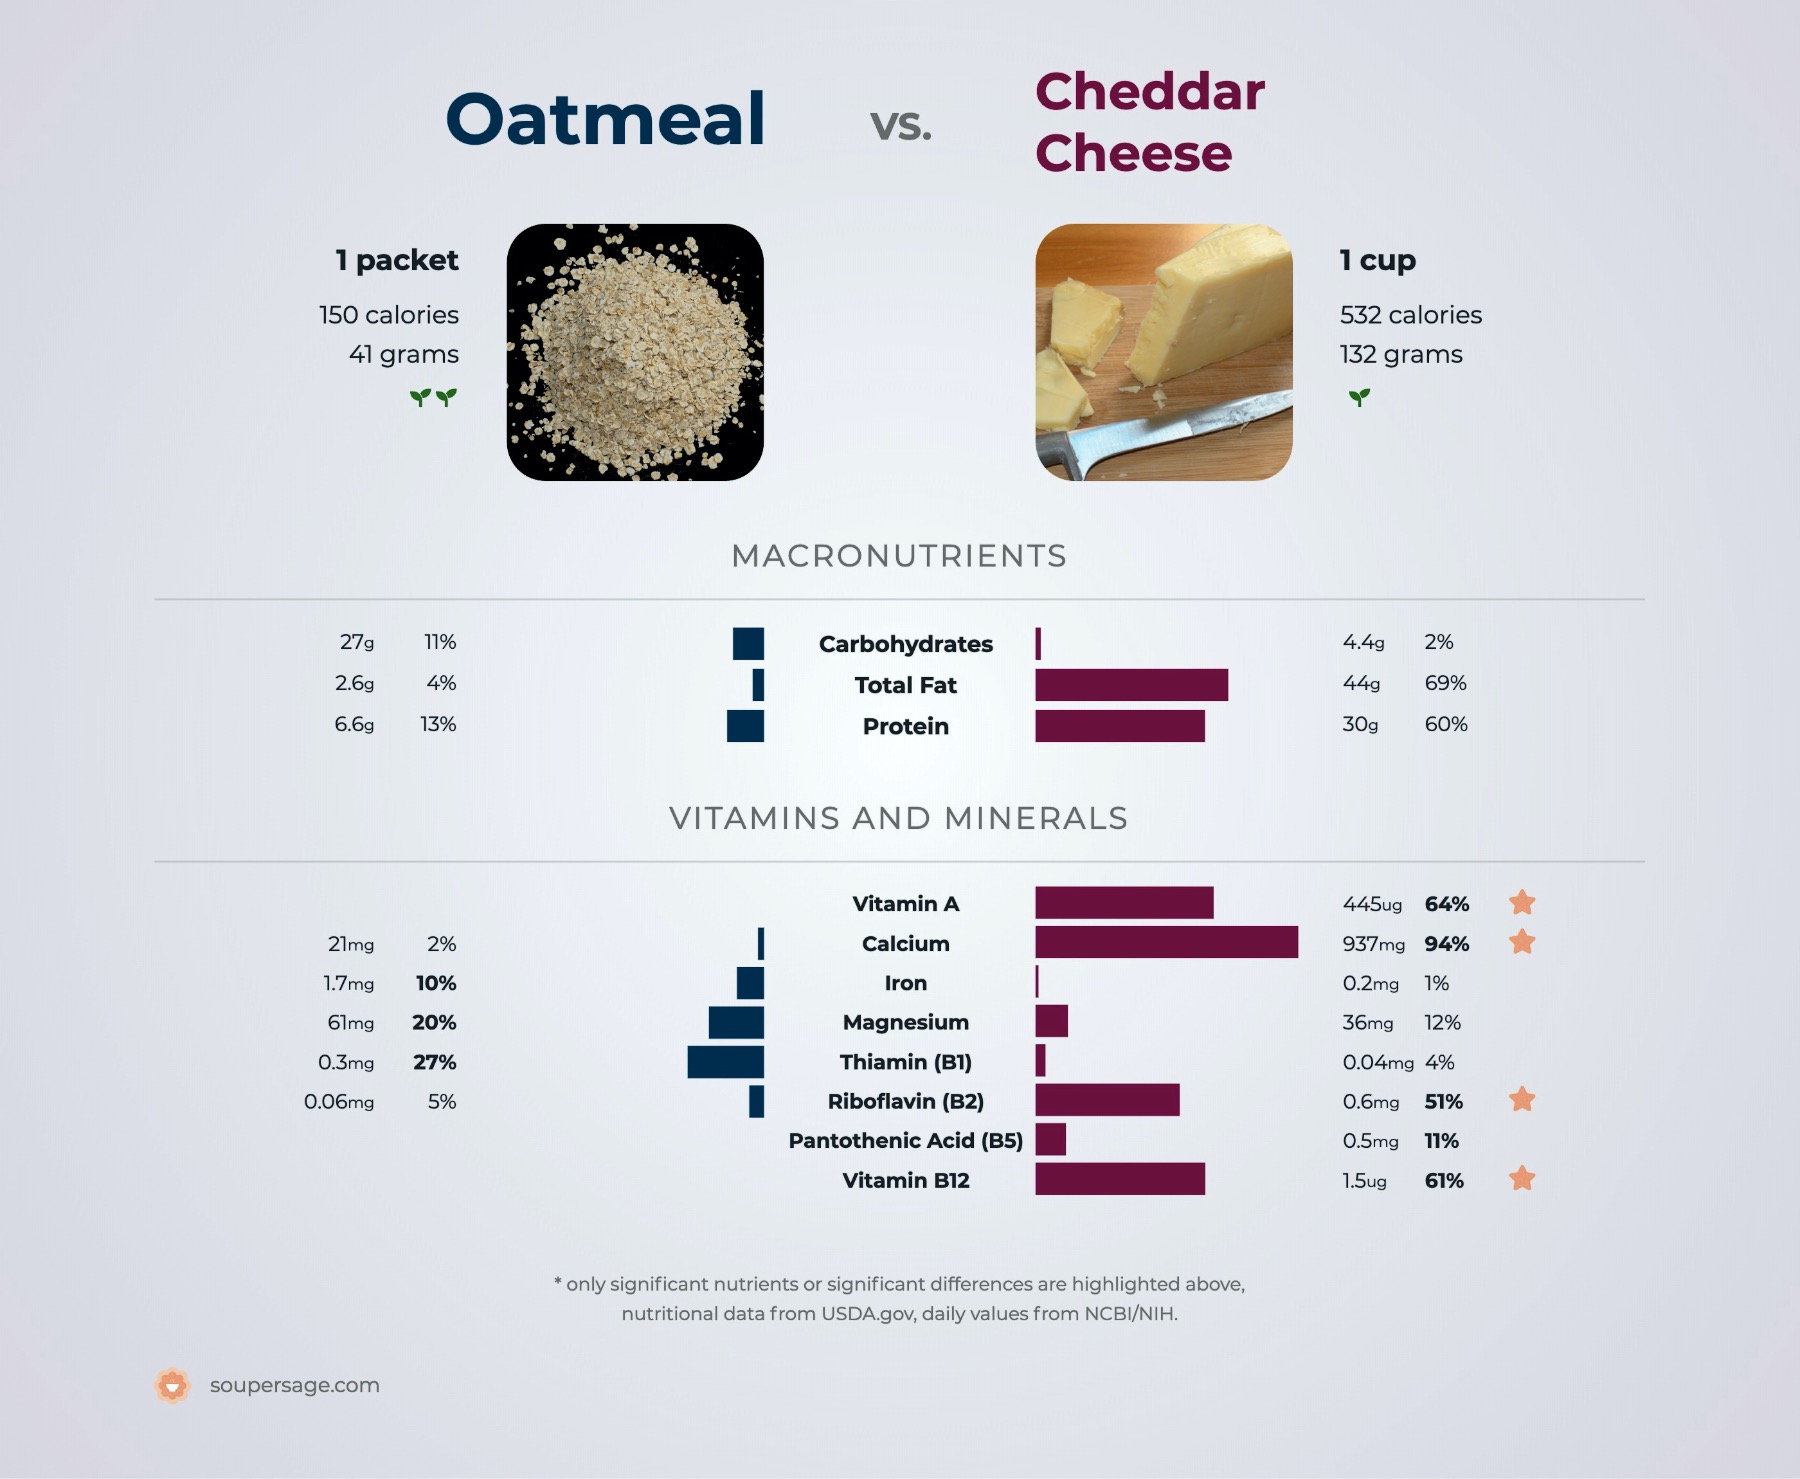 nutrition comparison of oatmeal vs. cheddar cheese